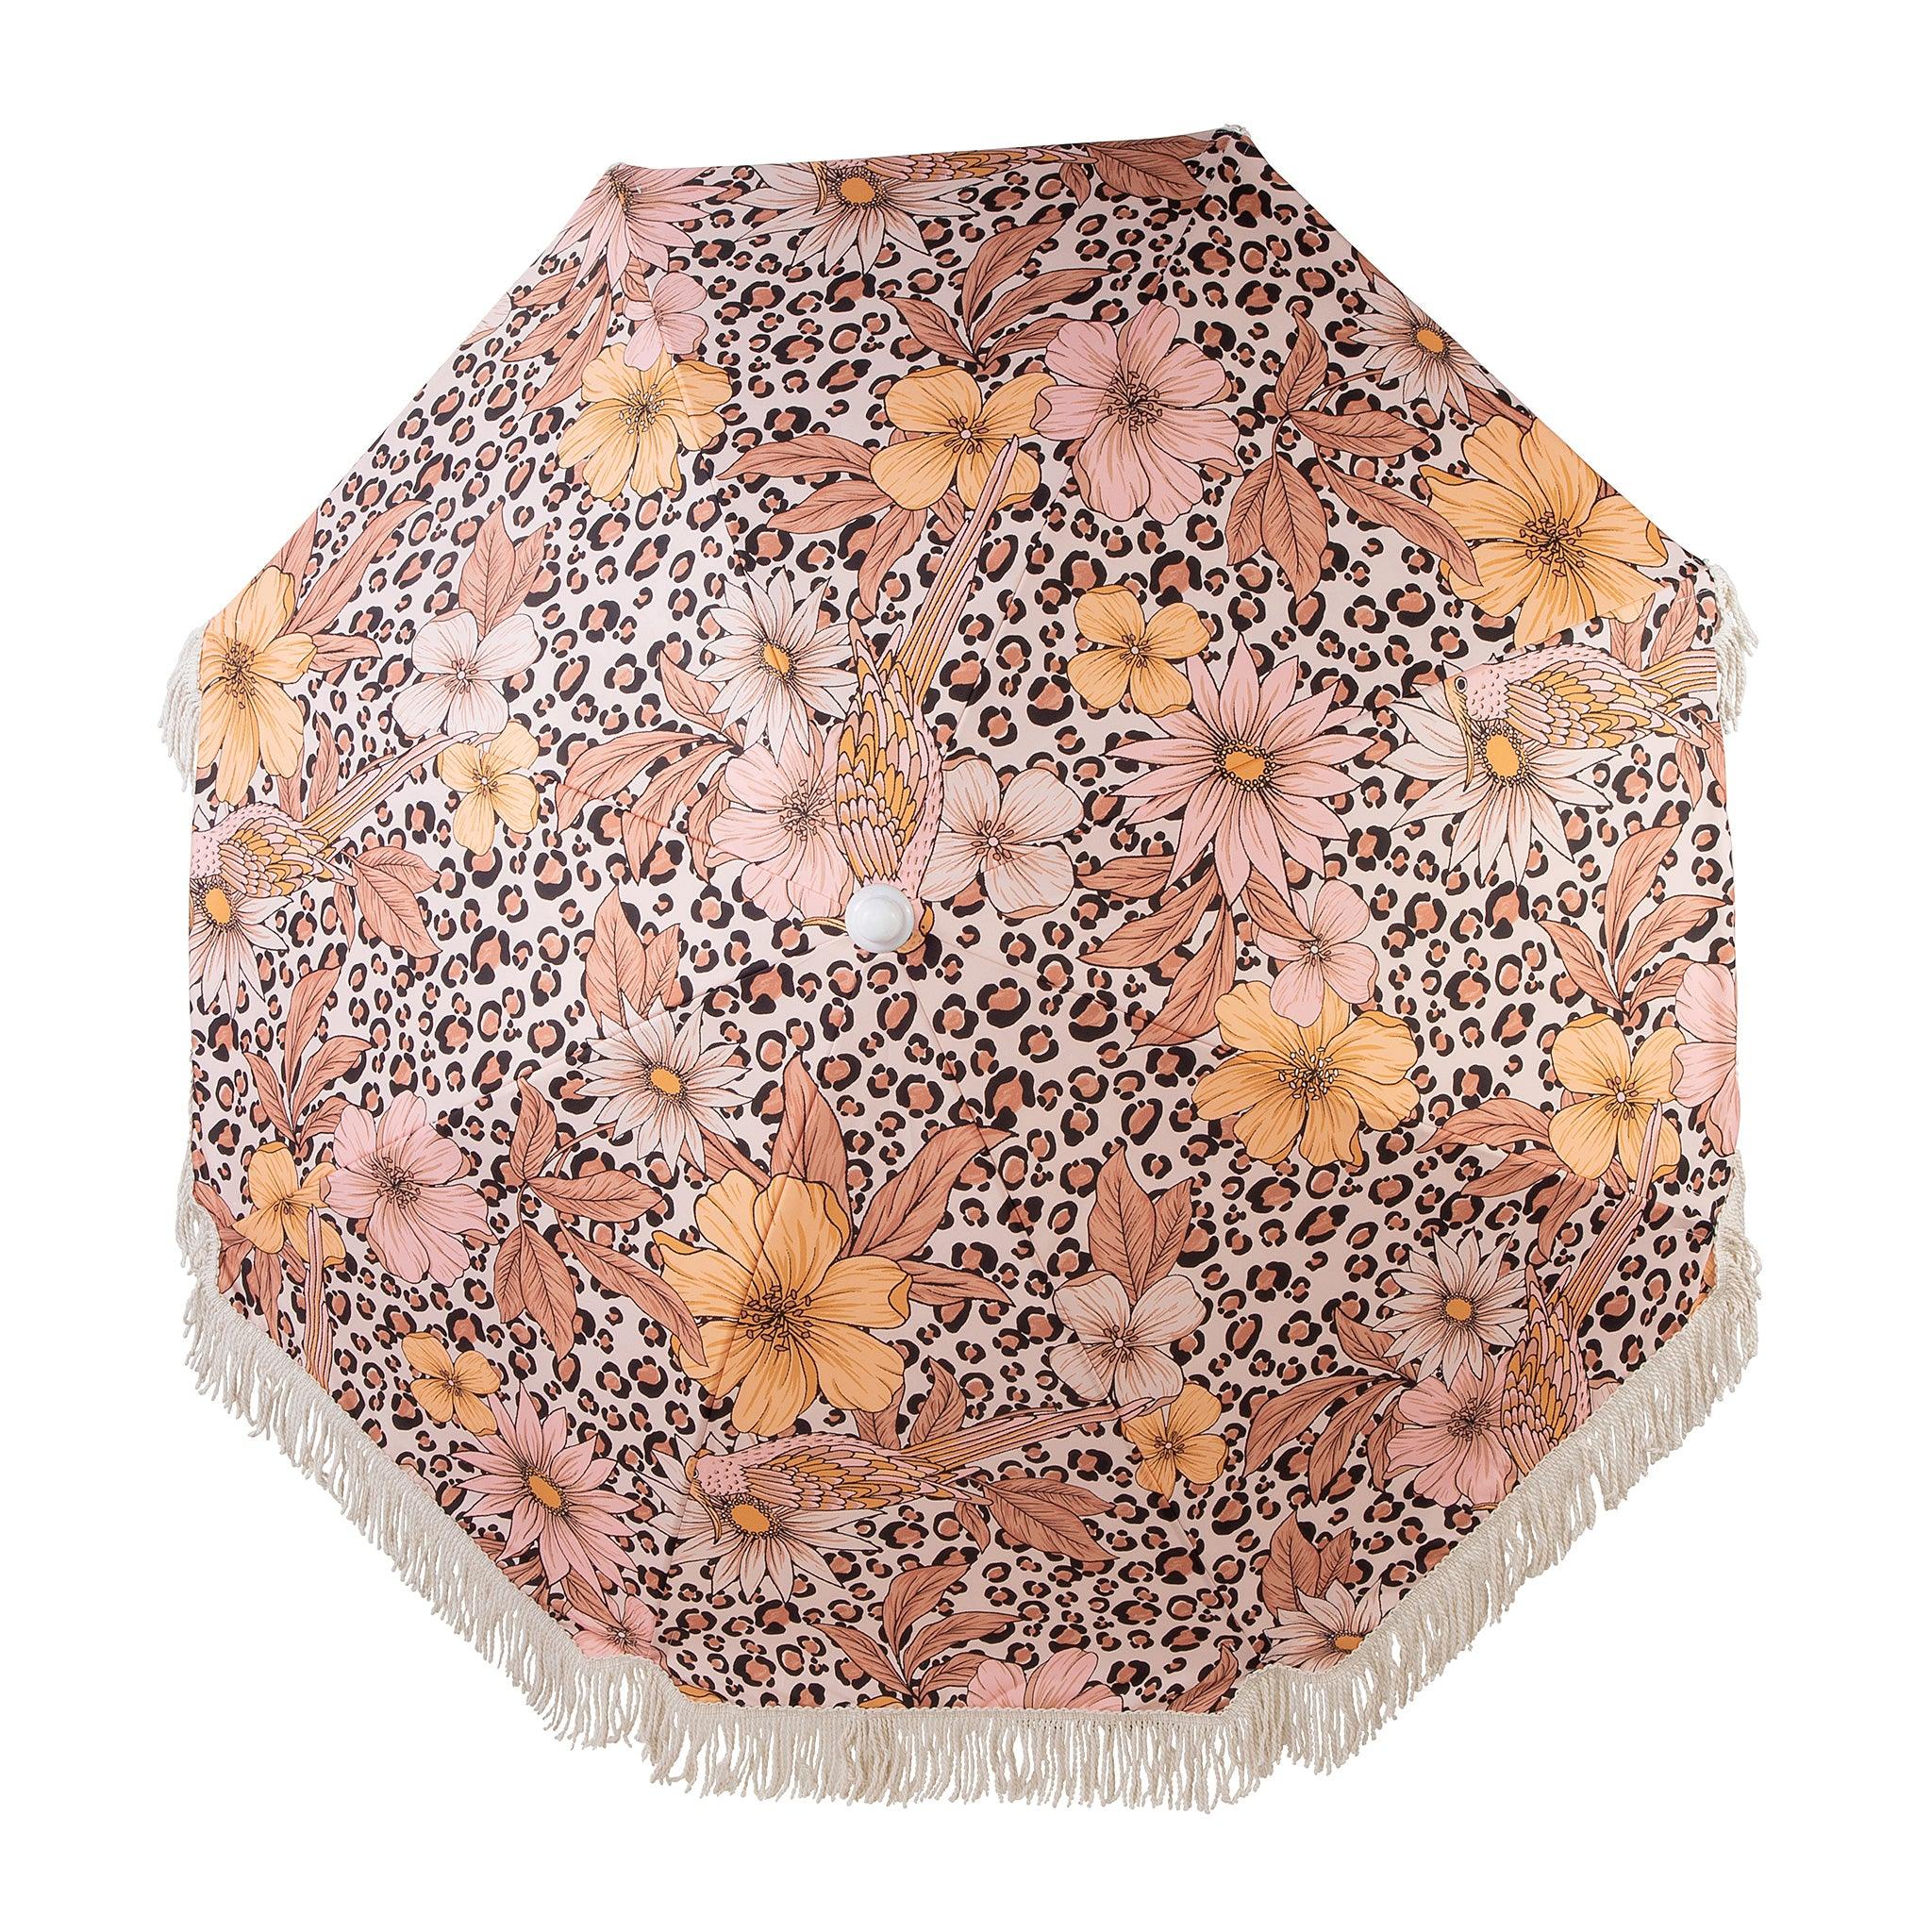 Umbrella Large Leopard Floral-Travel & Outdoors-Kollab-The Bay Room